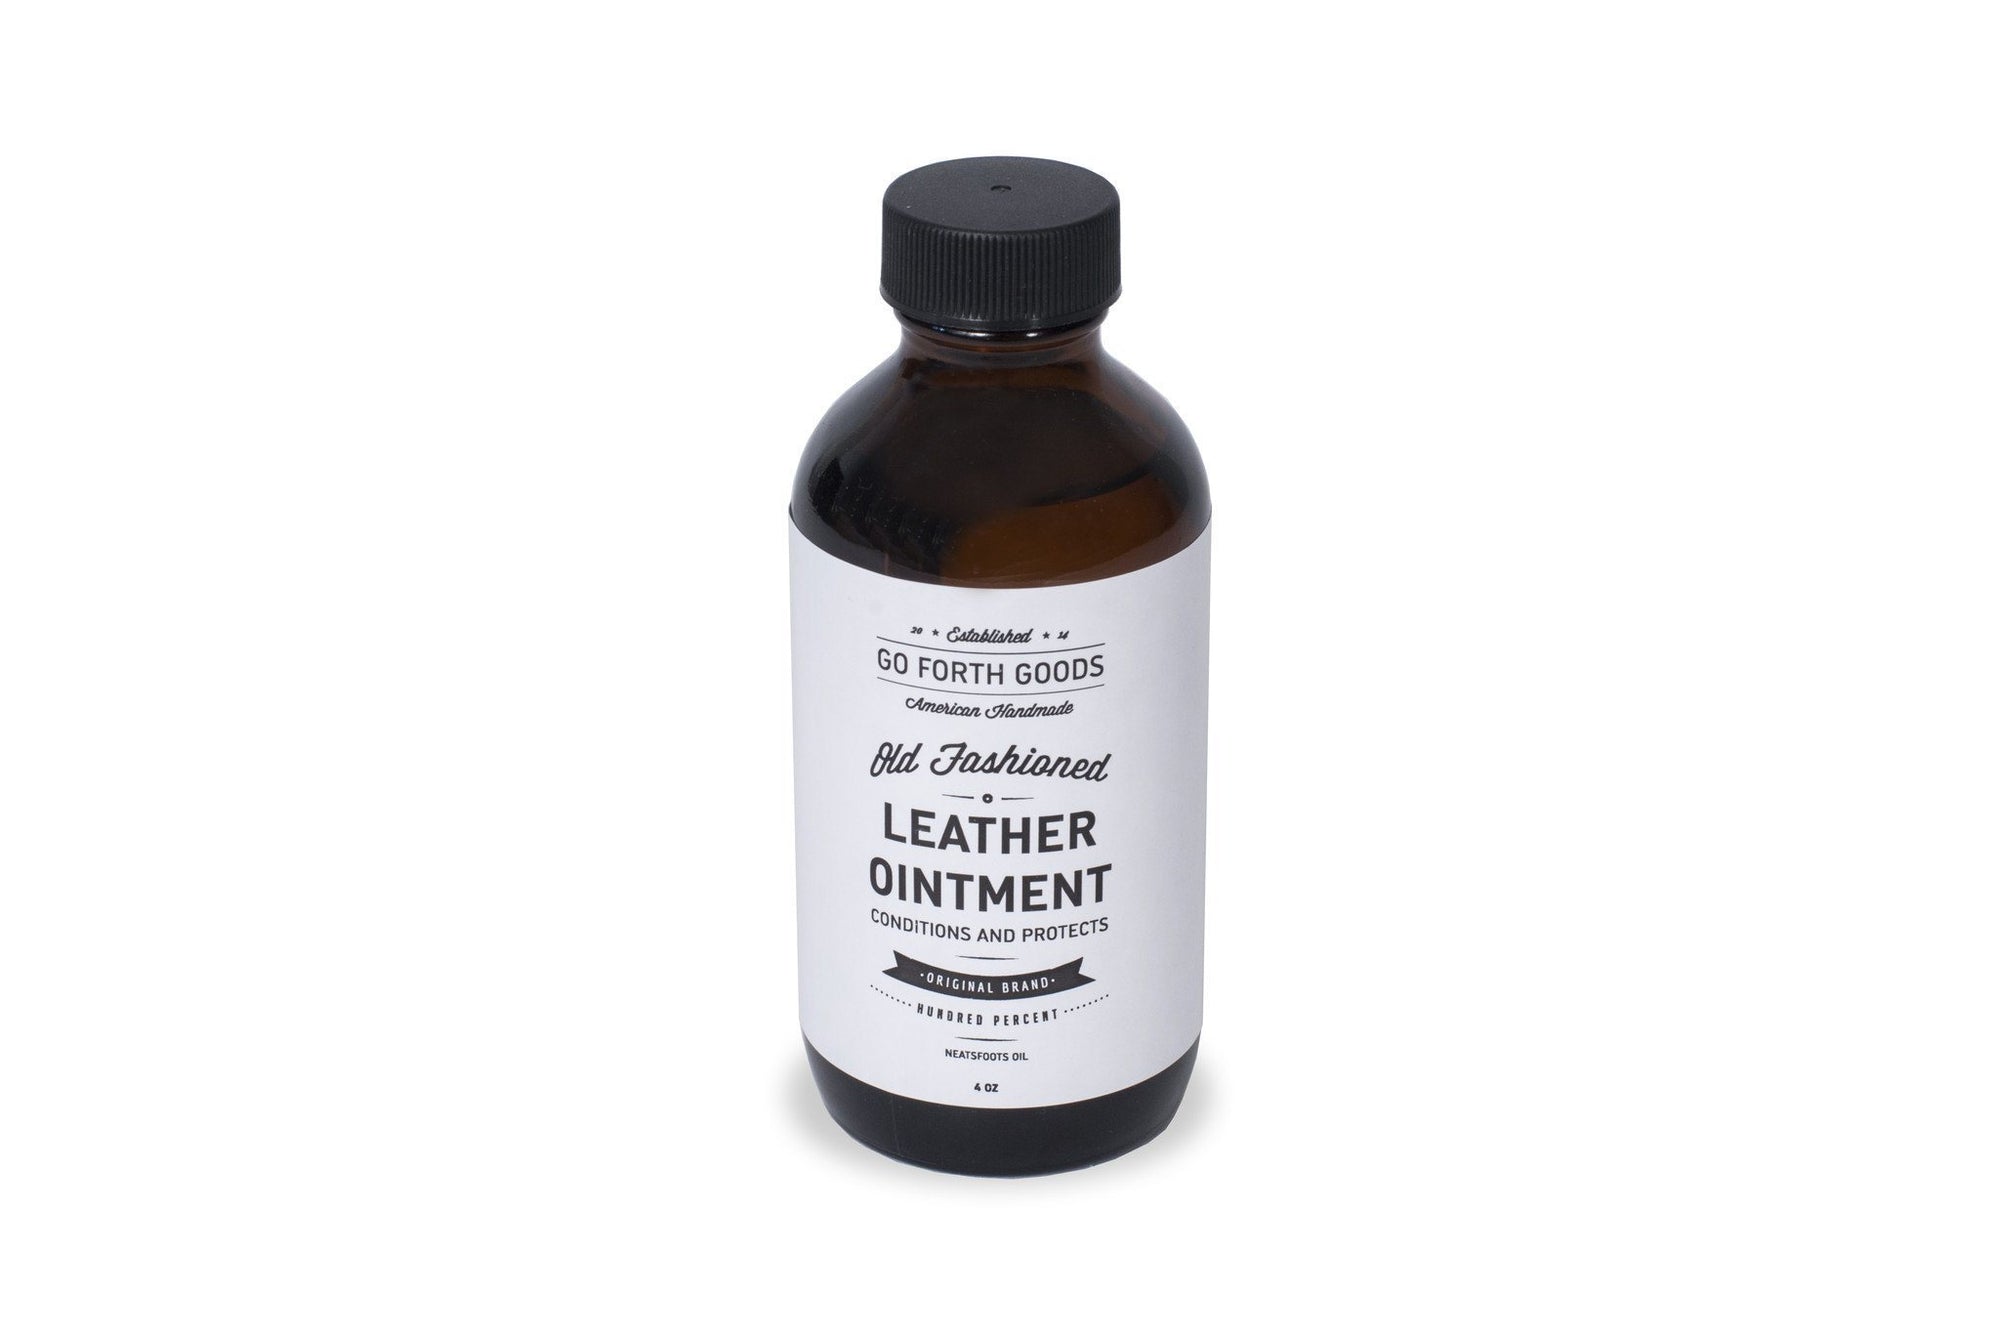 OLD FASHIONED LEATHER OINTMENT